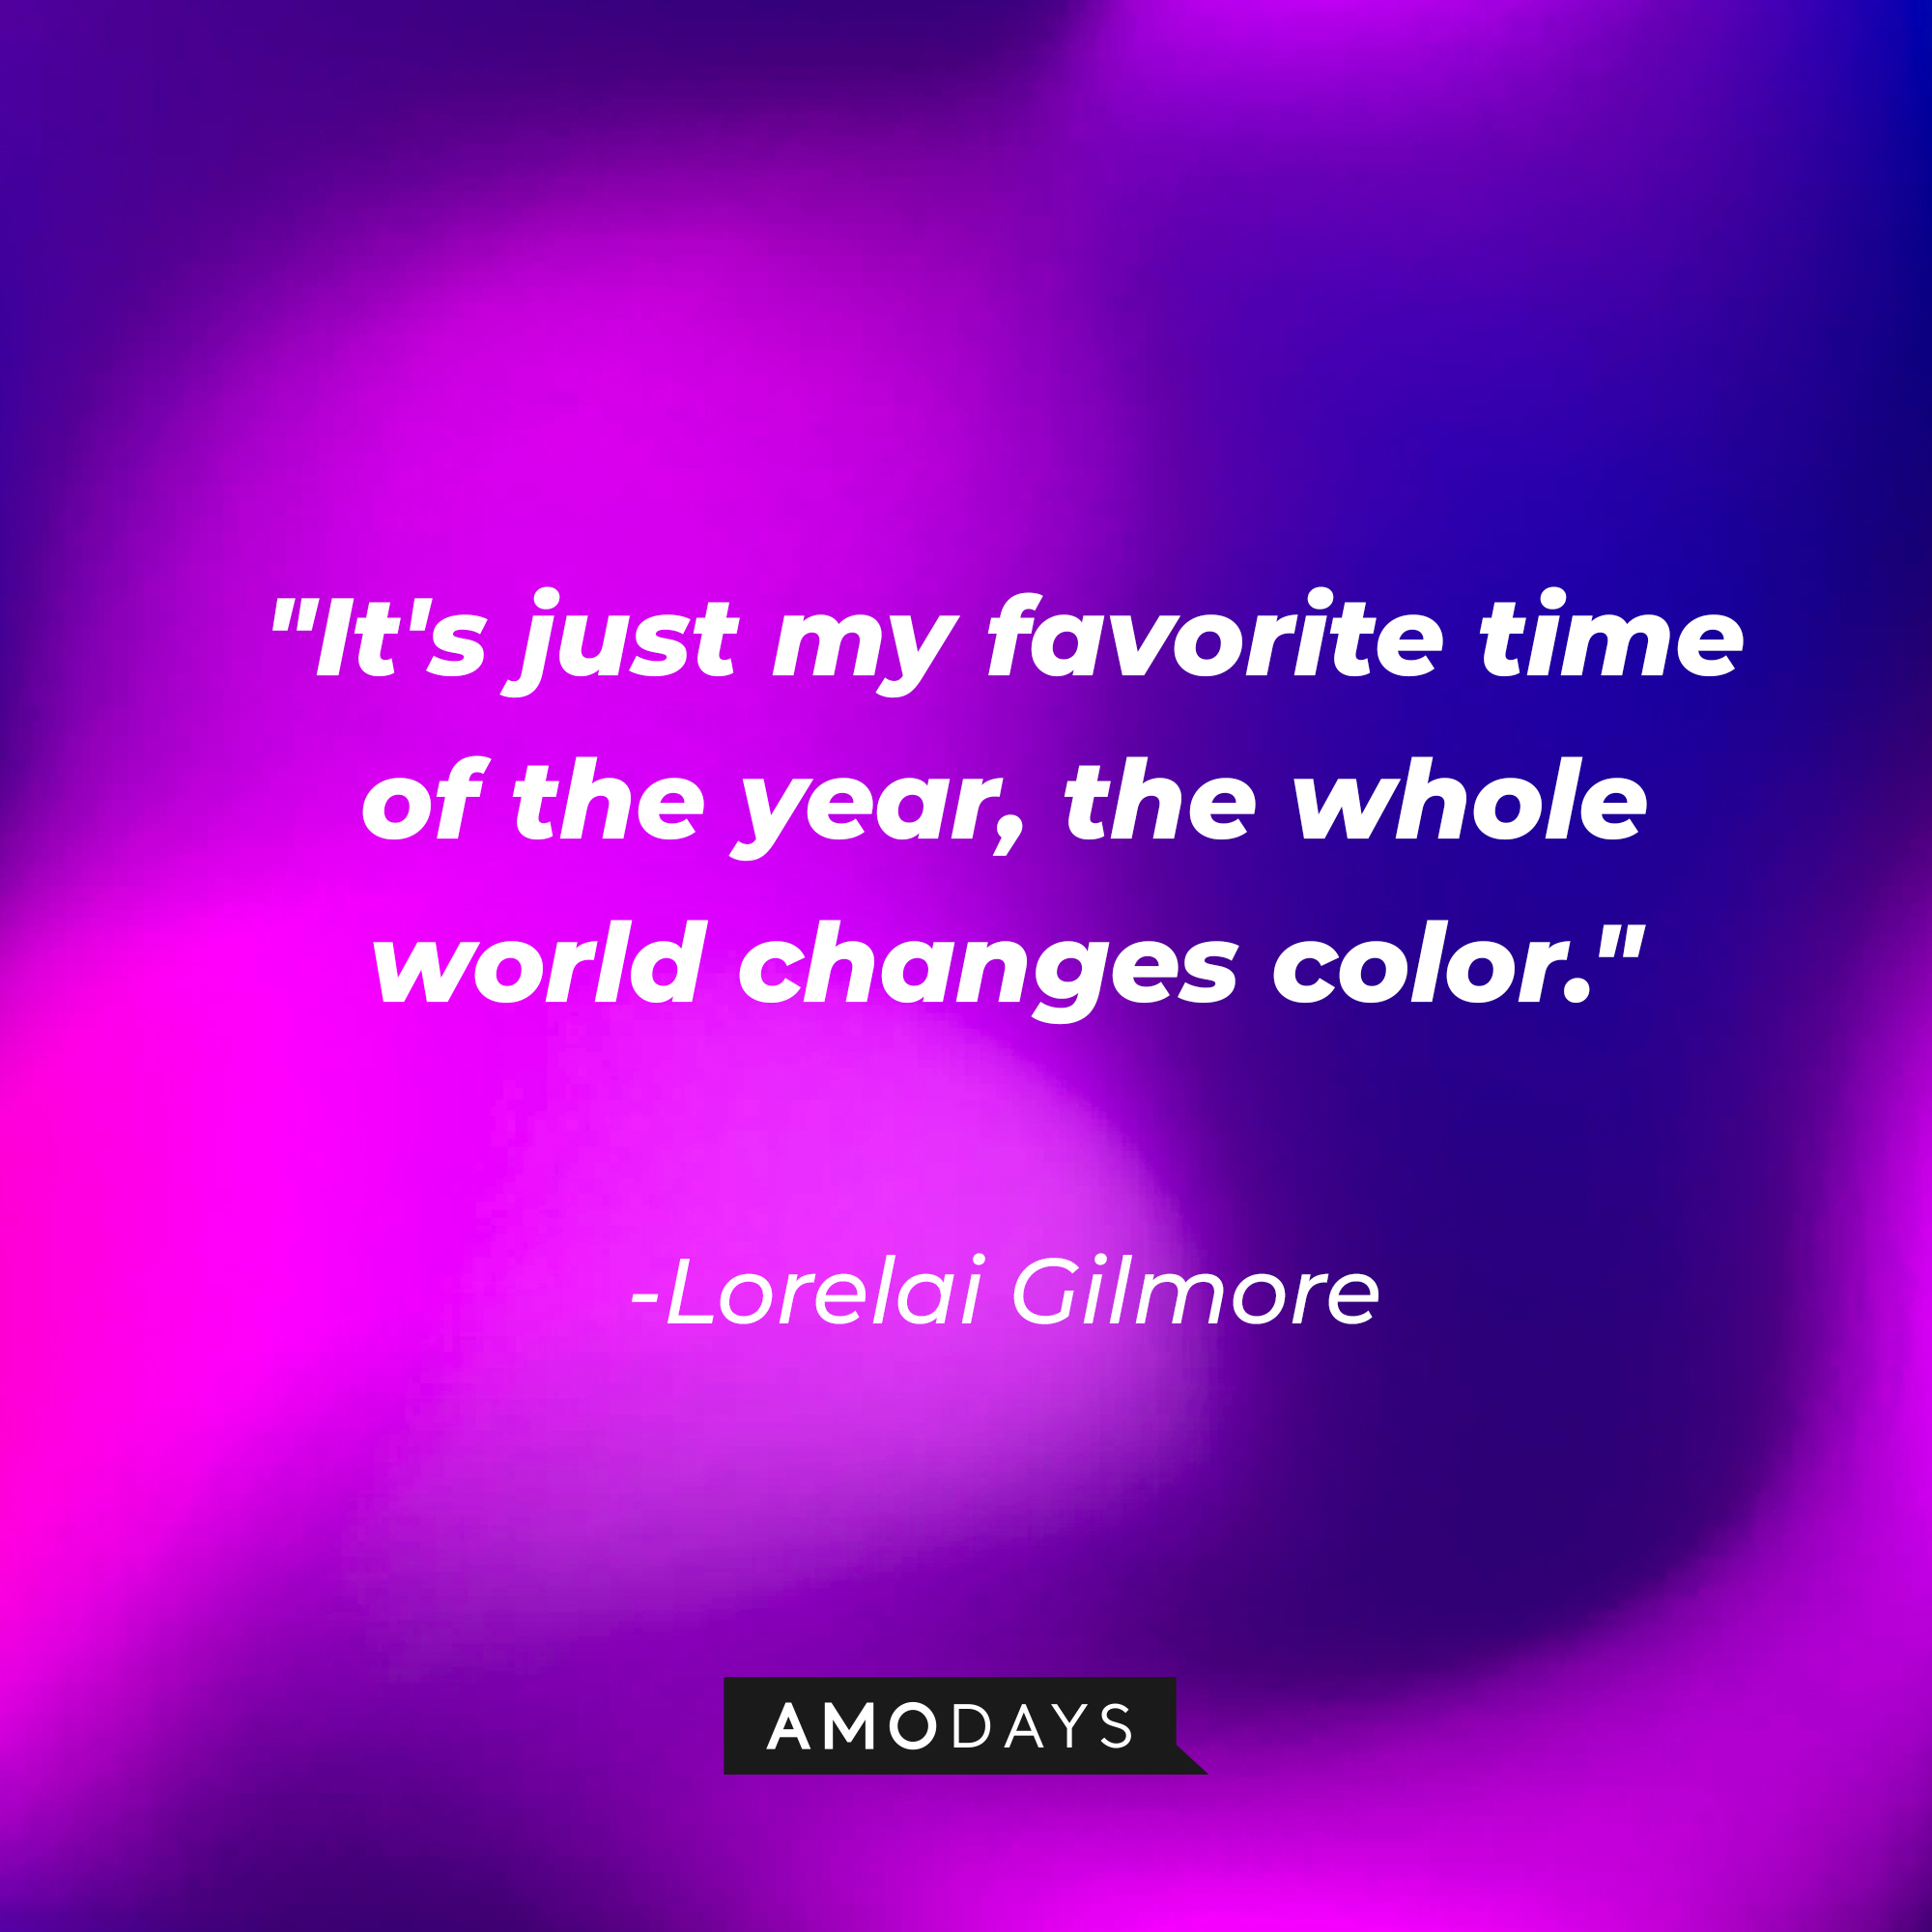 Lorelai Gilmore's quote: "It's just my favorite time of the year, the whole world changes color." | Source: AmoDays